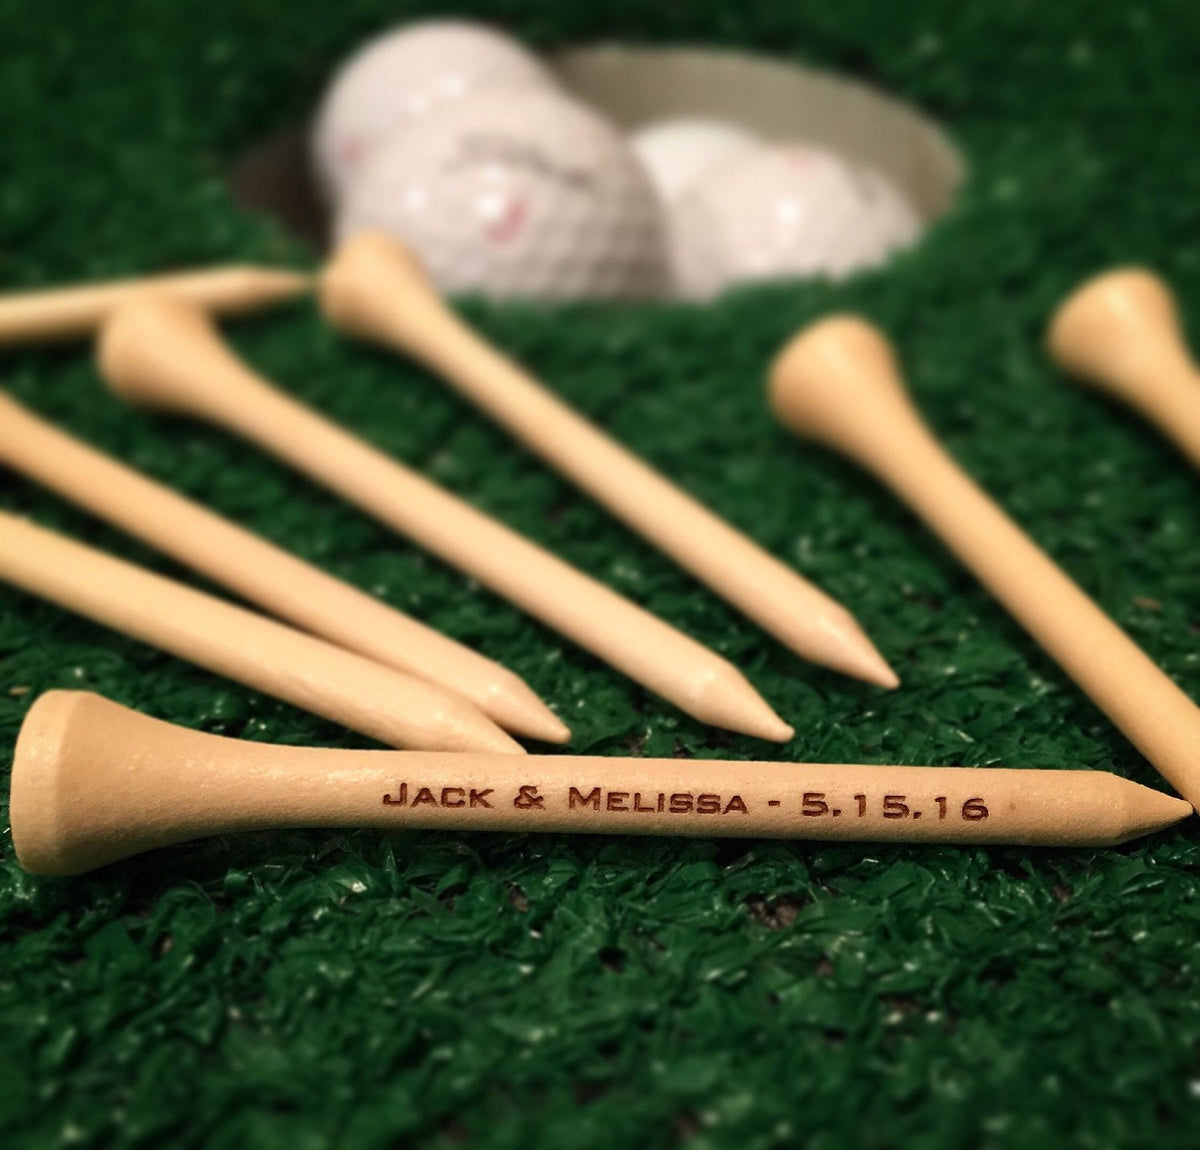 Personalized golf tees, Wedding Date Golf Tees/2.75" Natural Wood or White, Engraved golf tees, Custom golf tees, Save the date golf tees - RCH Gifts